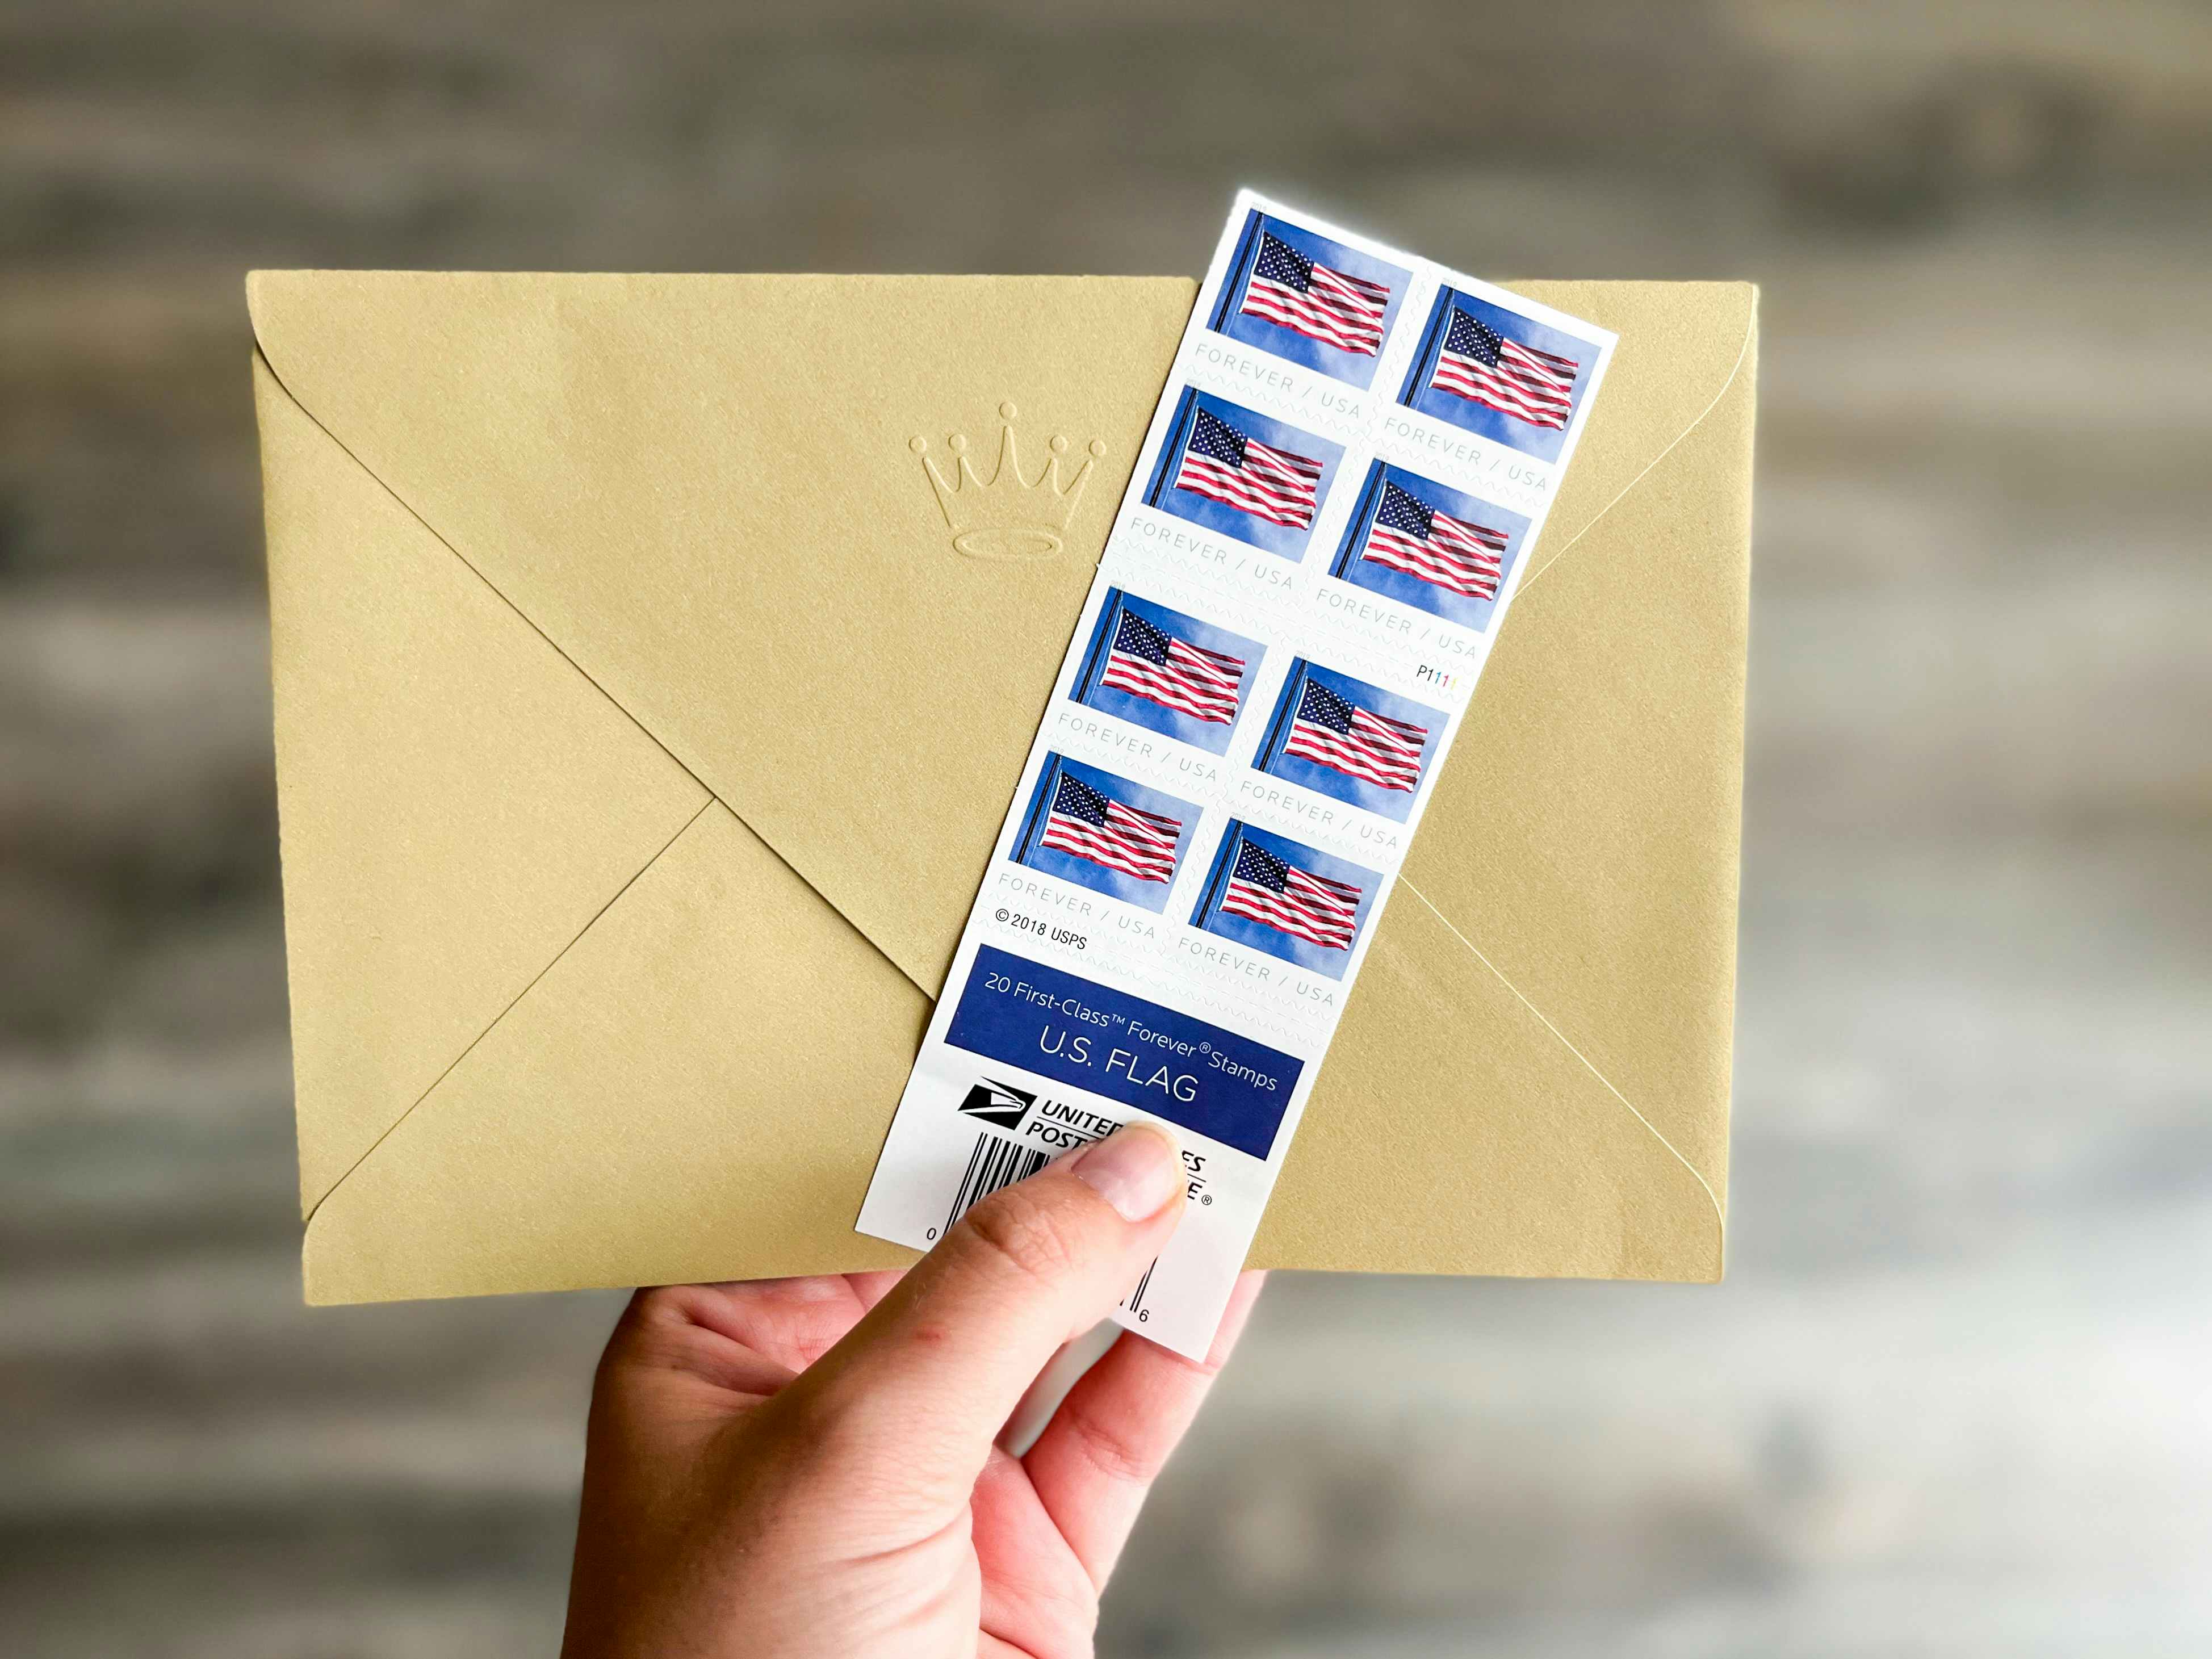 A person's hand holding up an envelope and some American flag Forever postage stamps.